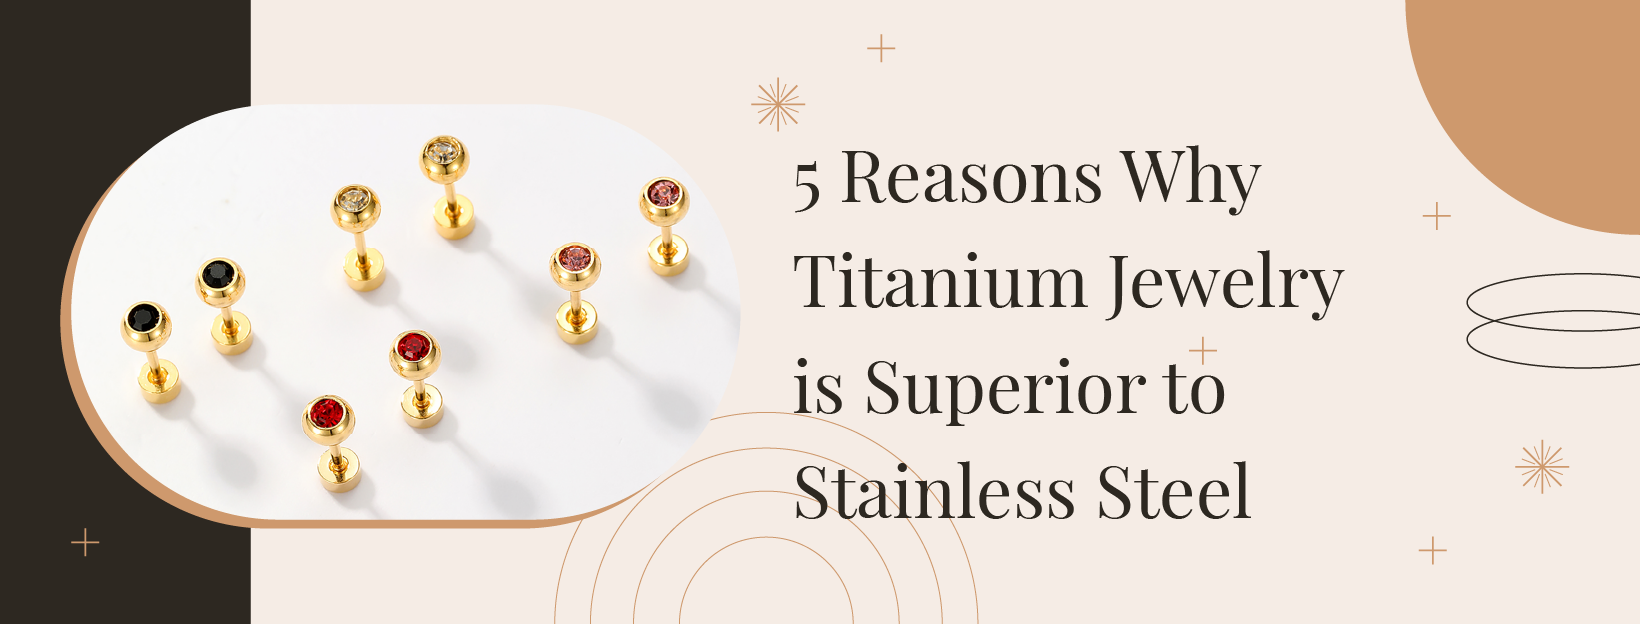 Titanium as compared to the various other jewelry metals such as